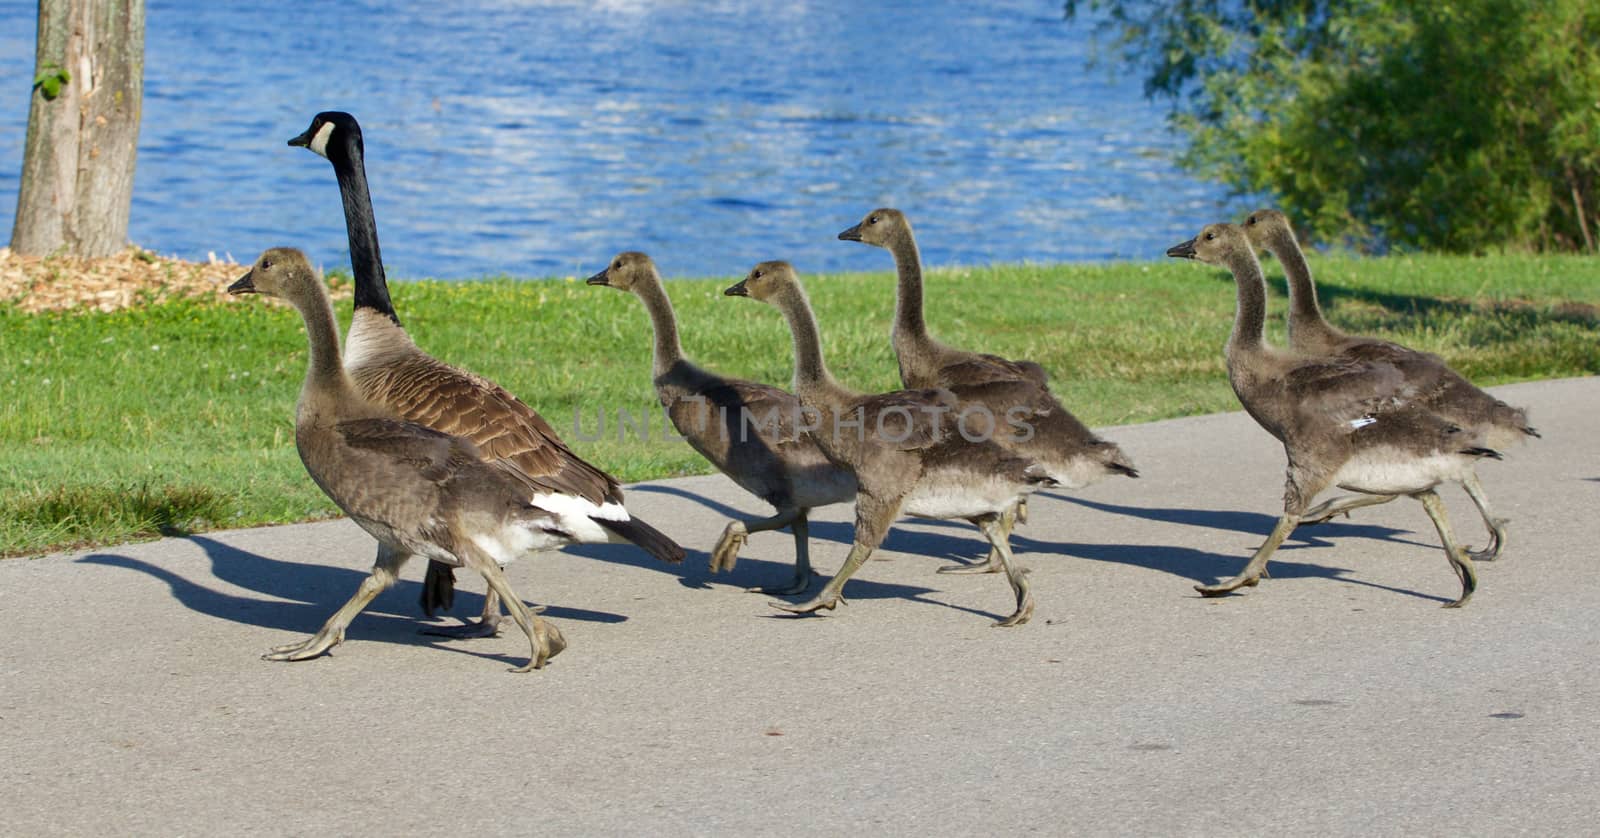 The young cackling geese are running across the road